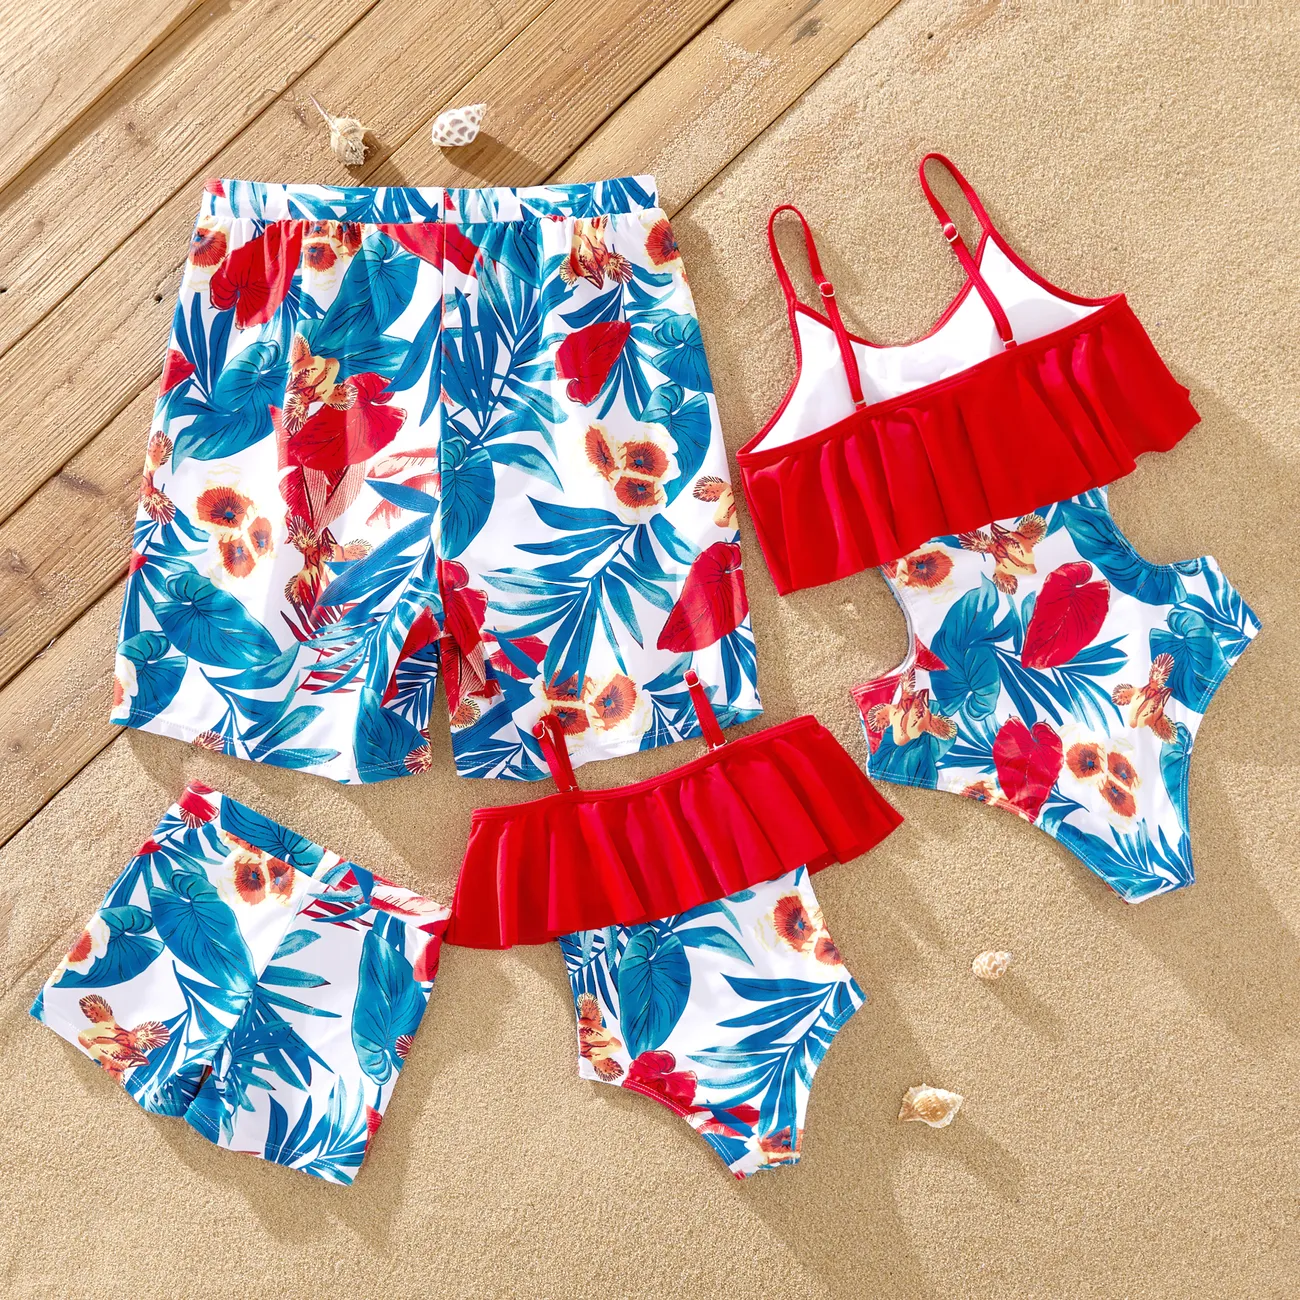 Family Matching Floral Drawstring Swim Trunks or Flounce Cut Out One-Piece Strap Swimsuit Red big image 1